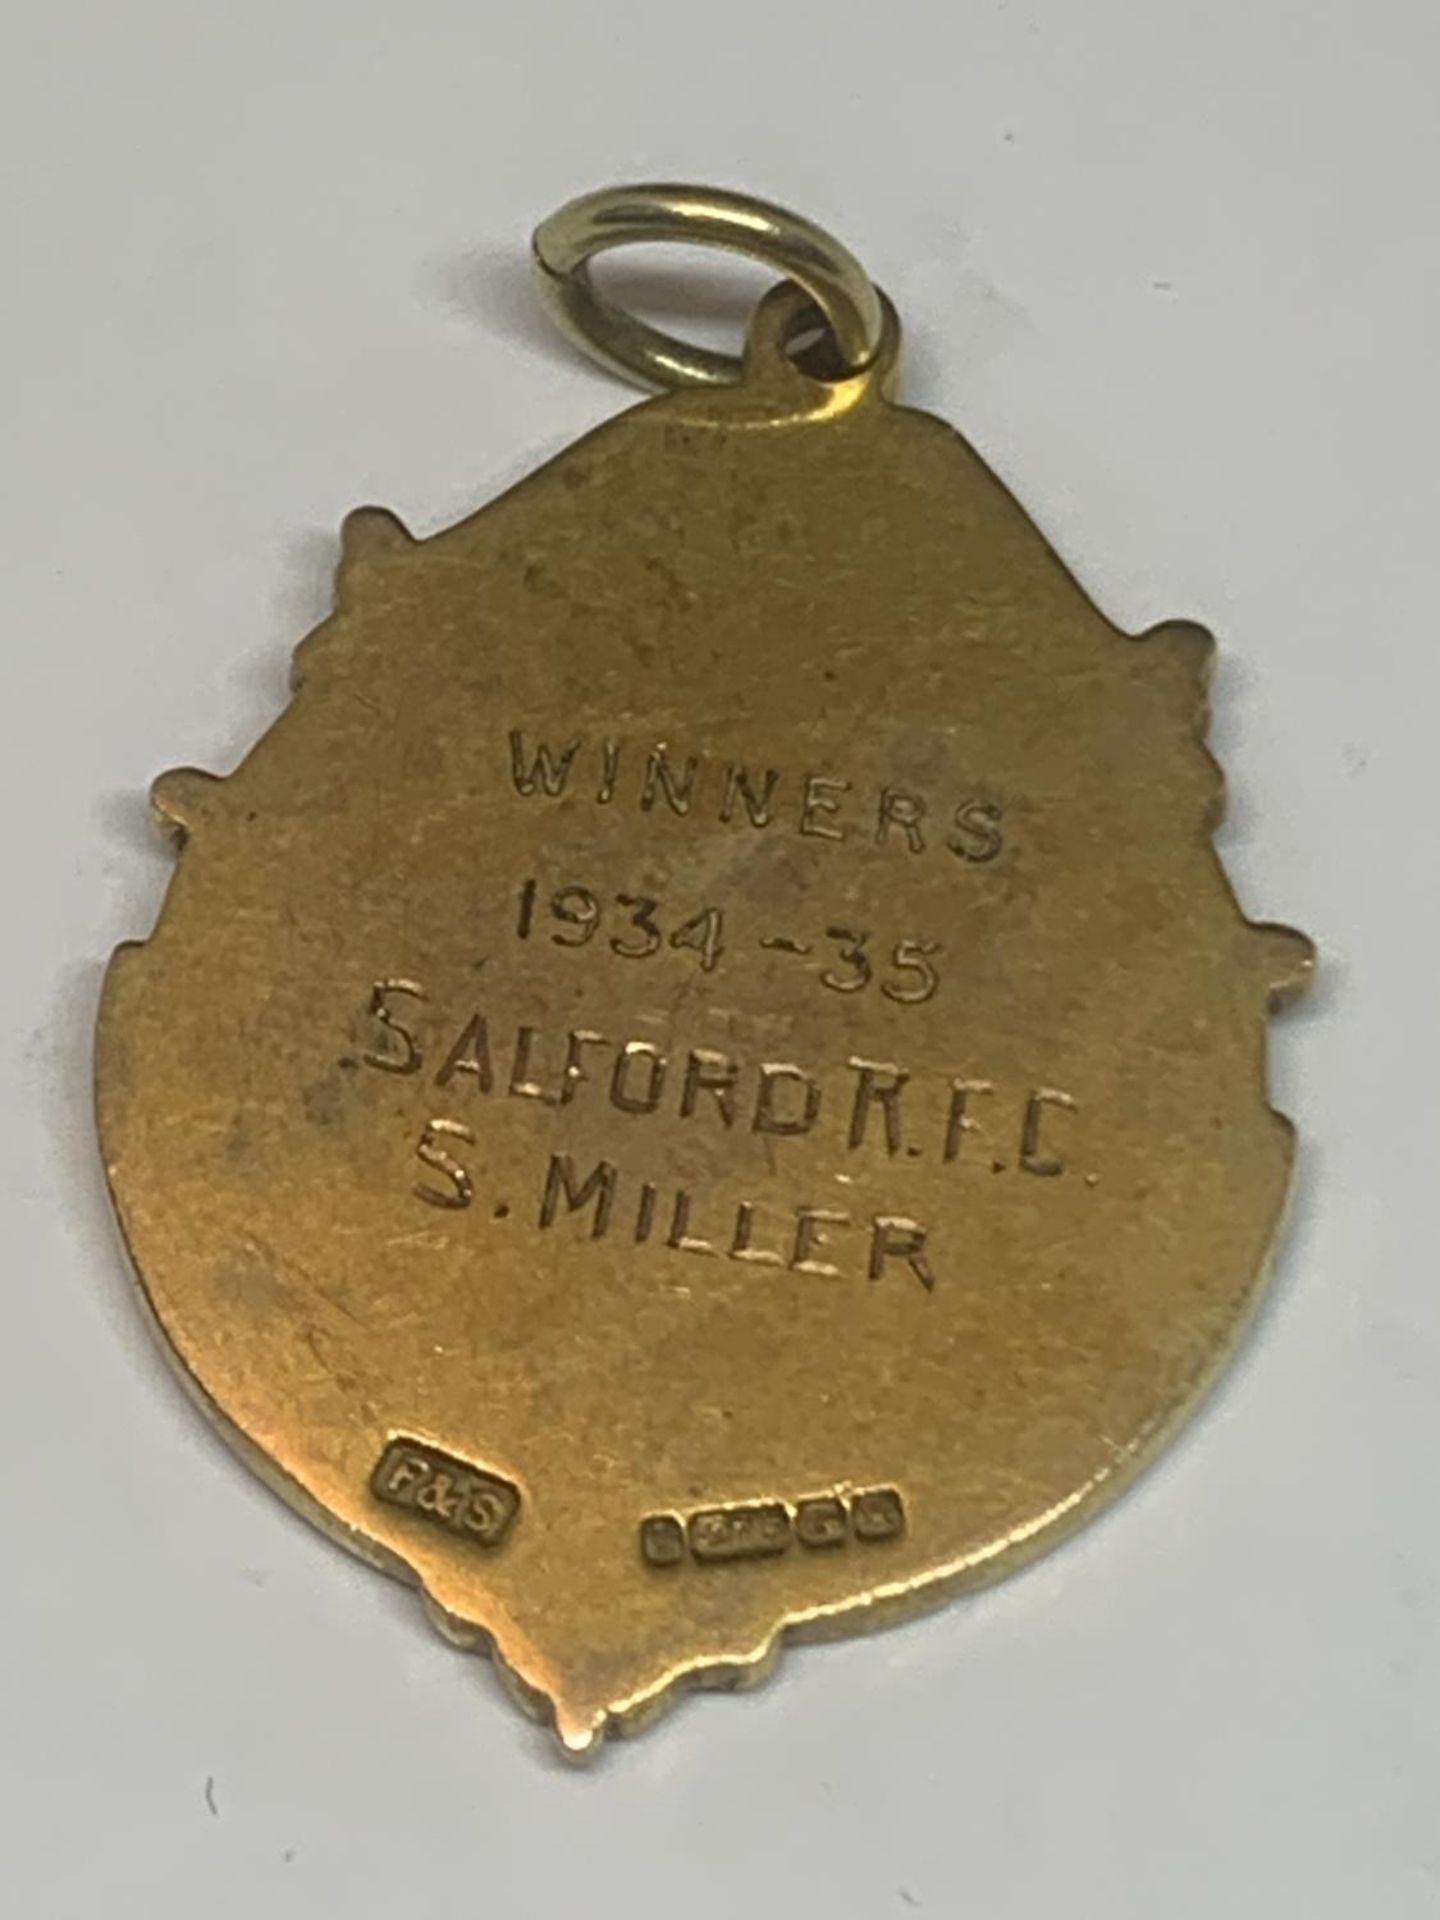 A HALLMARKED 9 CARAT GOLD LANCASHIRE RUGBY LEAGUE MEDAL ENGRAVED WINNERS 1934-35 SALFORD R.F.C S. - Image 2 of 6